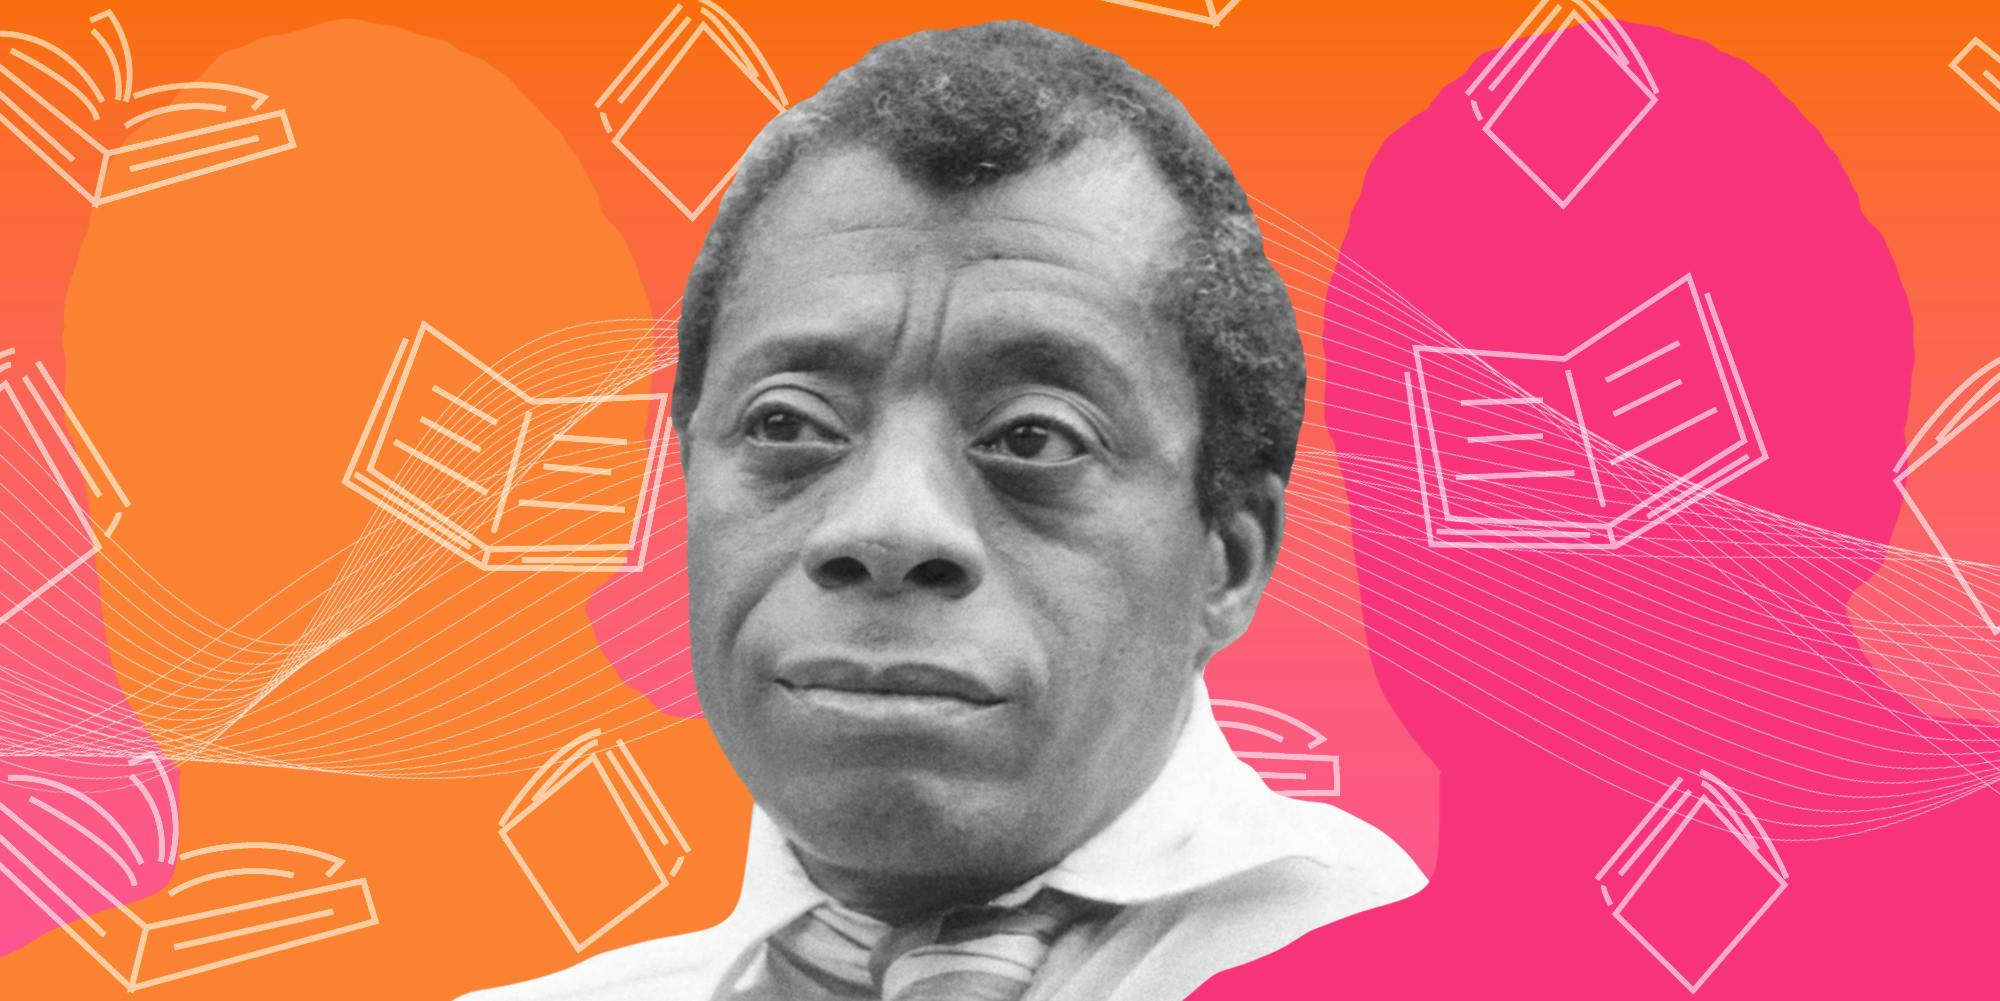 James Baldwin in front of orange to pink gradient background with book doodles Passionfruit Remix